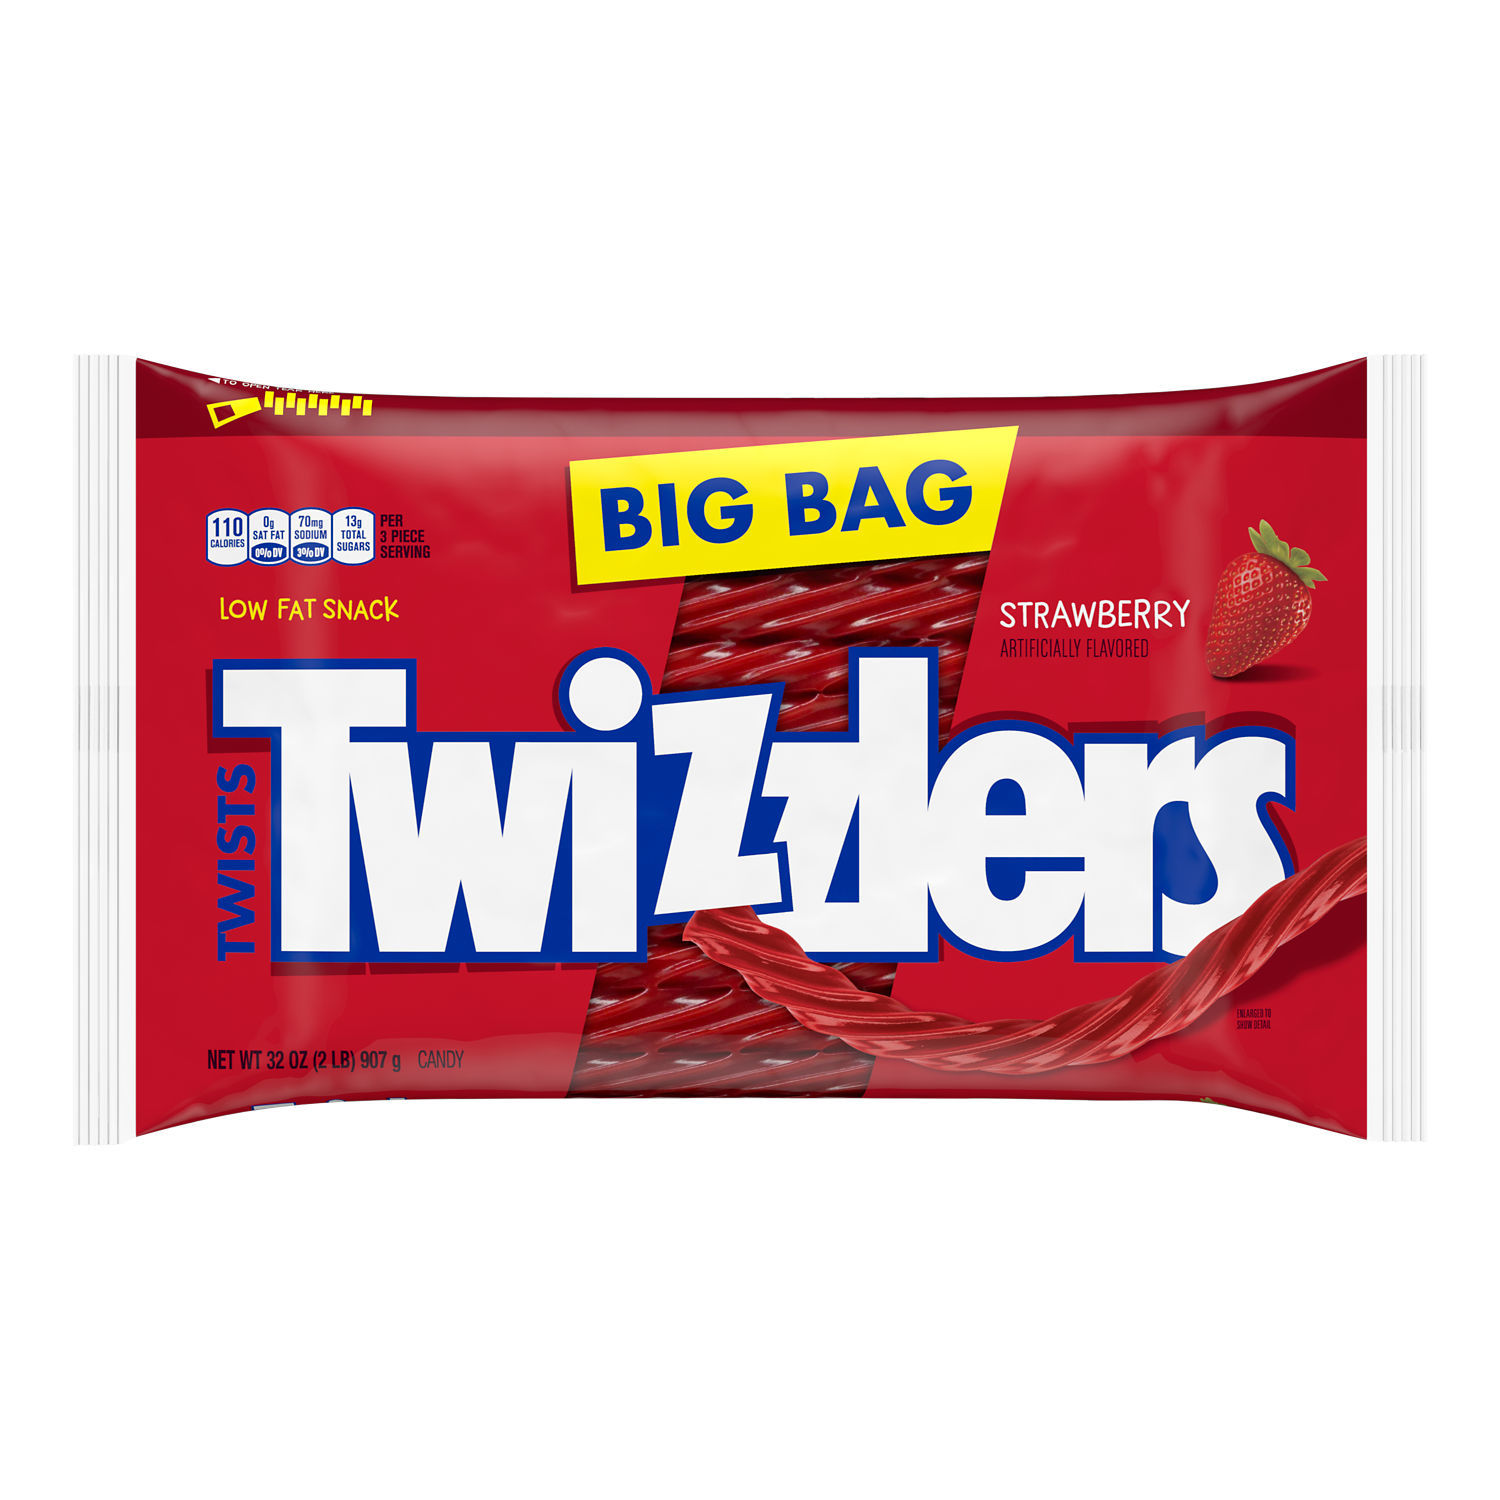 Twizzlers Twists Strawberry Flavored Licorice Style Low Fat Candy, Big Bag 32 oz - image 2 of 9